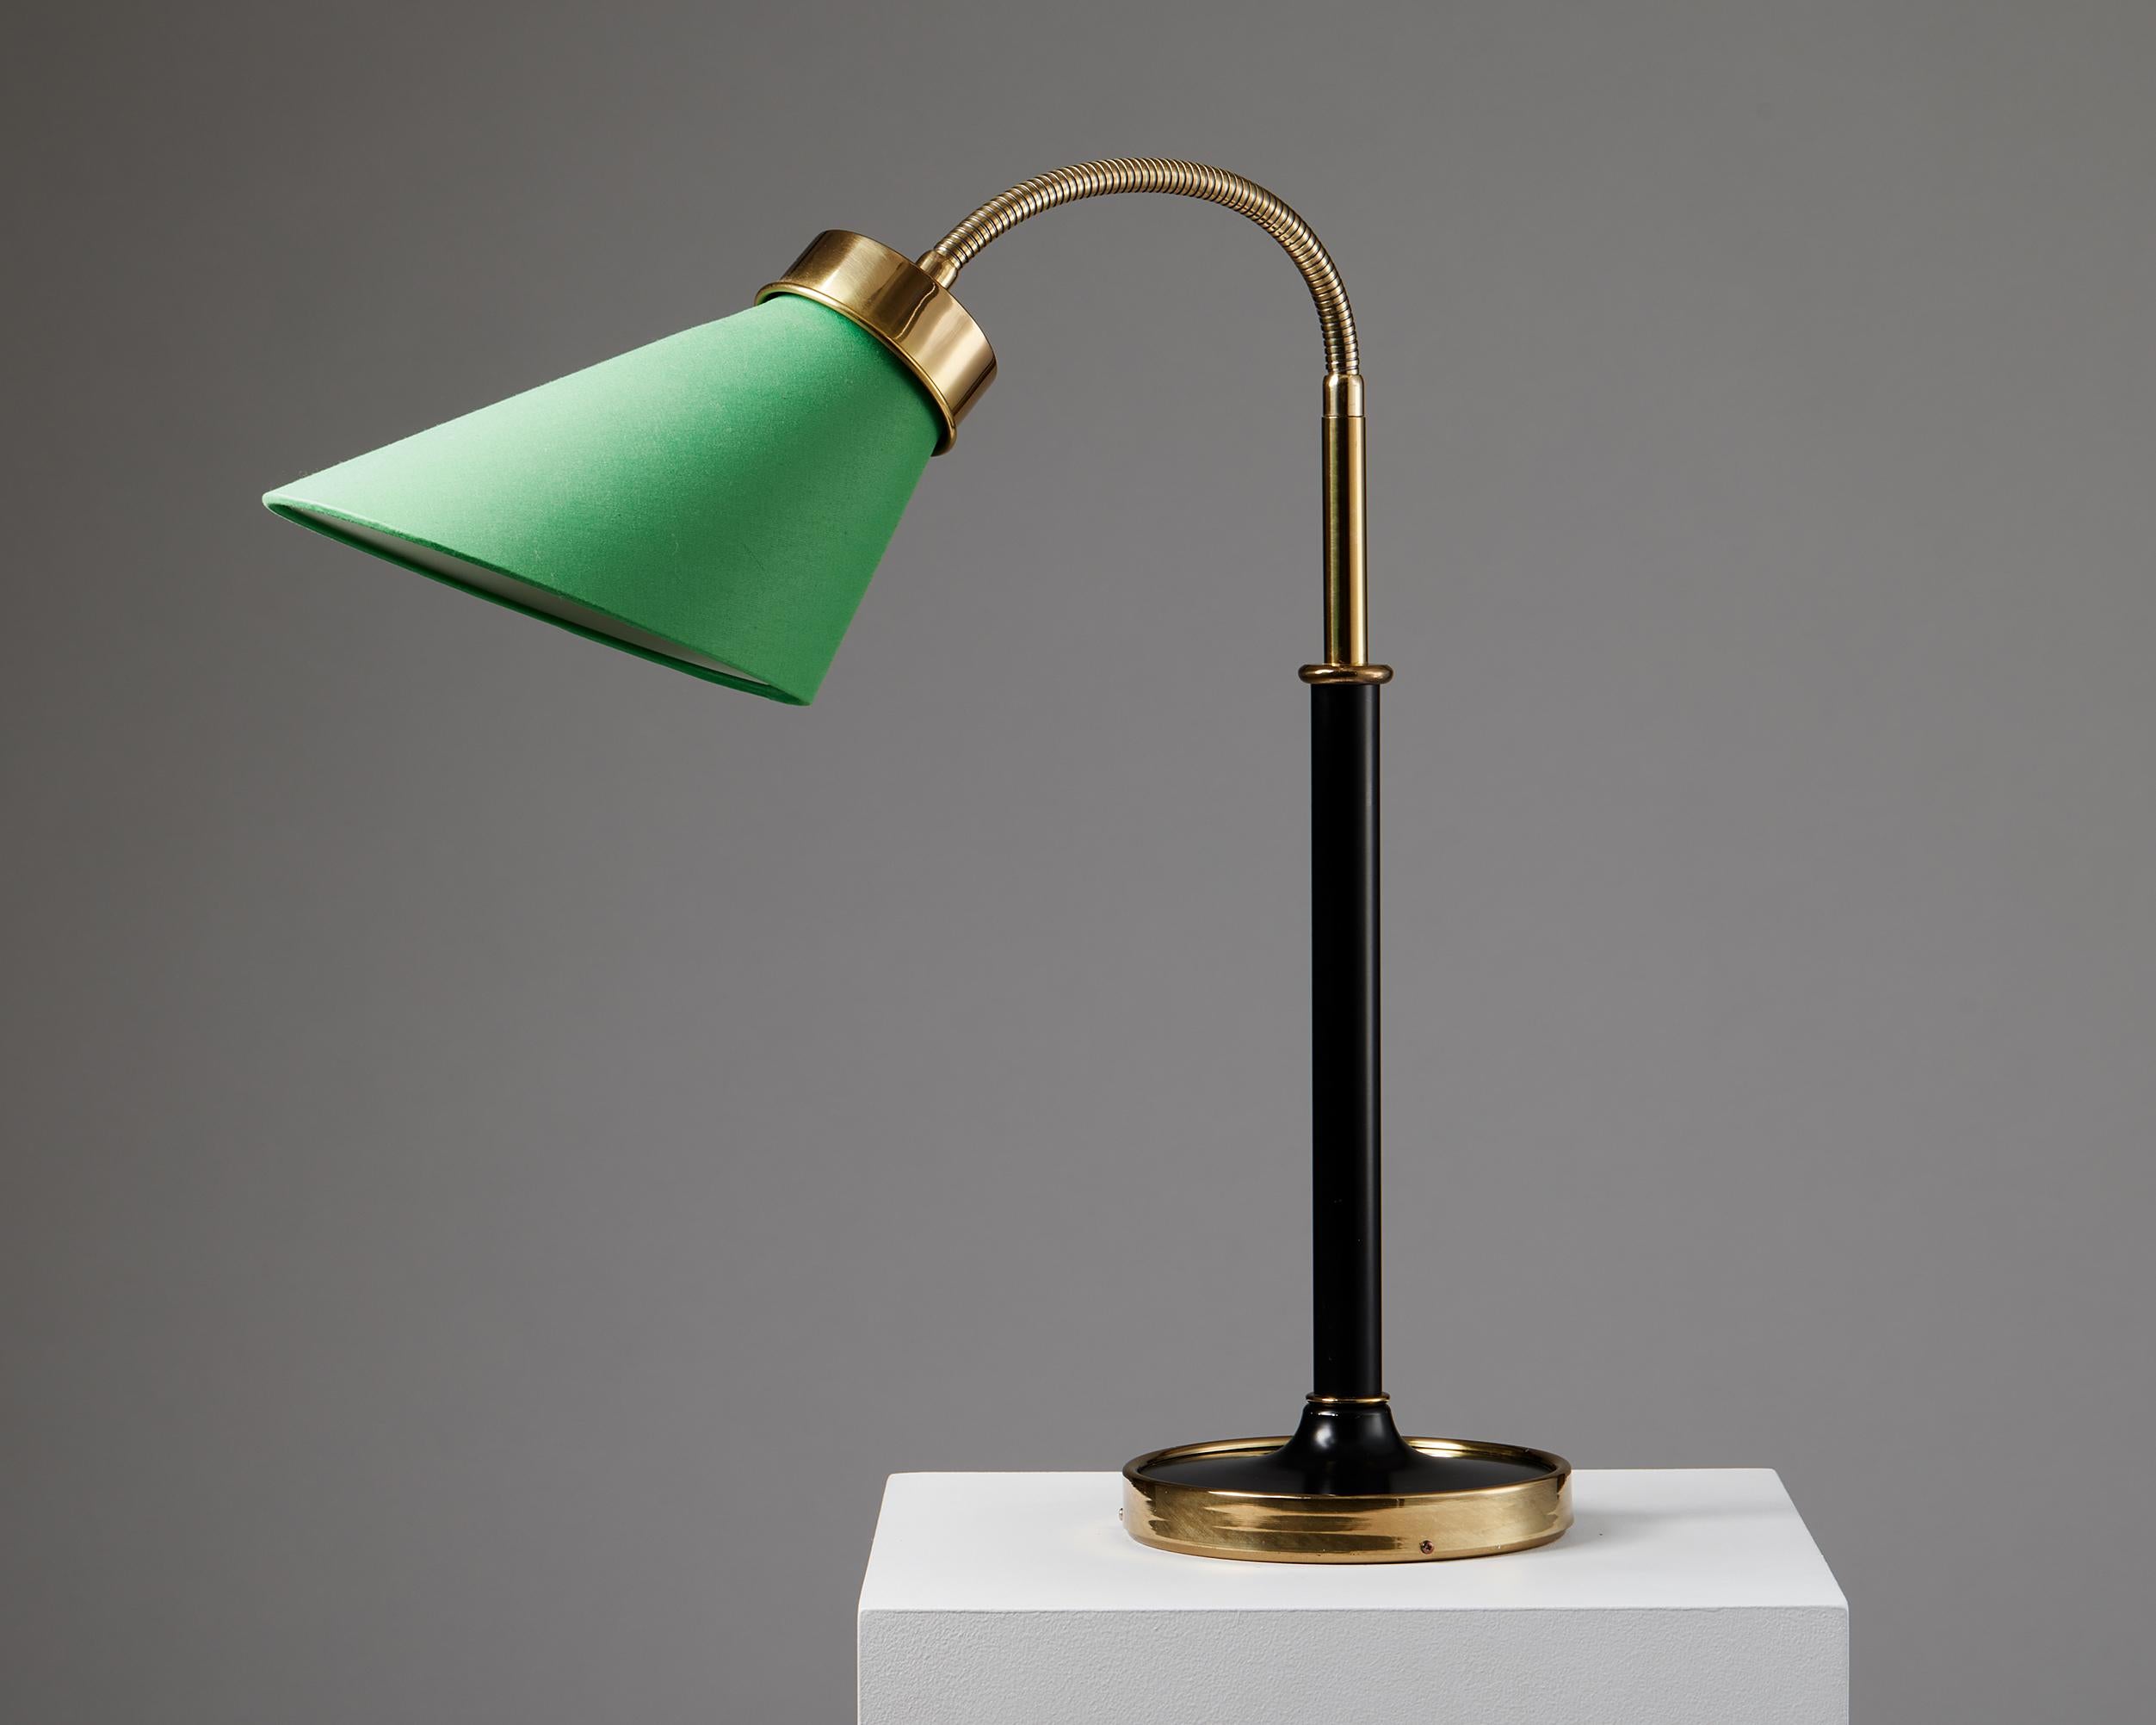 Table lamp model 2434 designed by Josef Frank for Svenskt Tenn,
Sweden, 1939.

Polished and lacquered brass with fabric shade.

Measures: 
H: 58 cm
W: 50 cm

Josef Frank was a true European, he was also a pioneer of what would become classic 20th